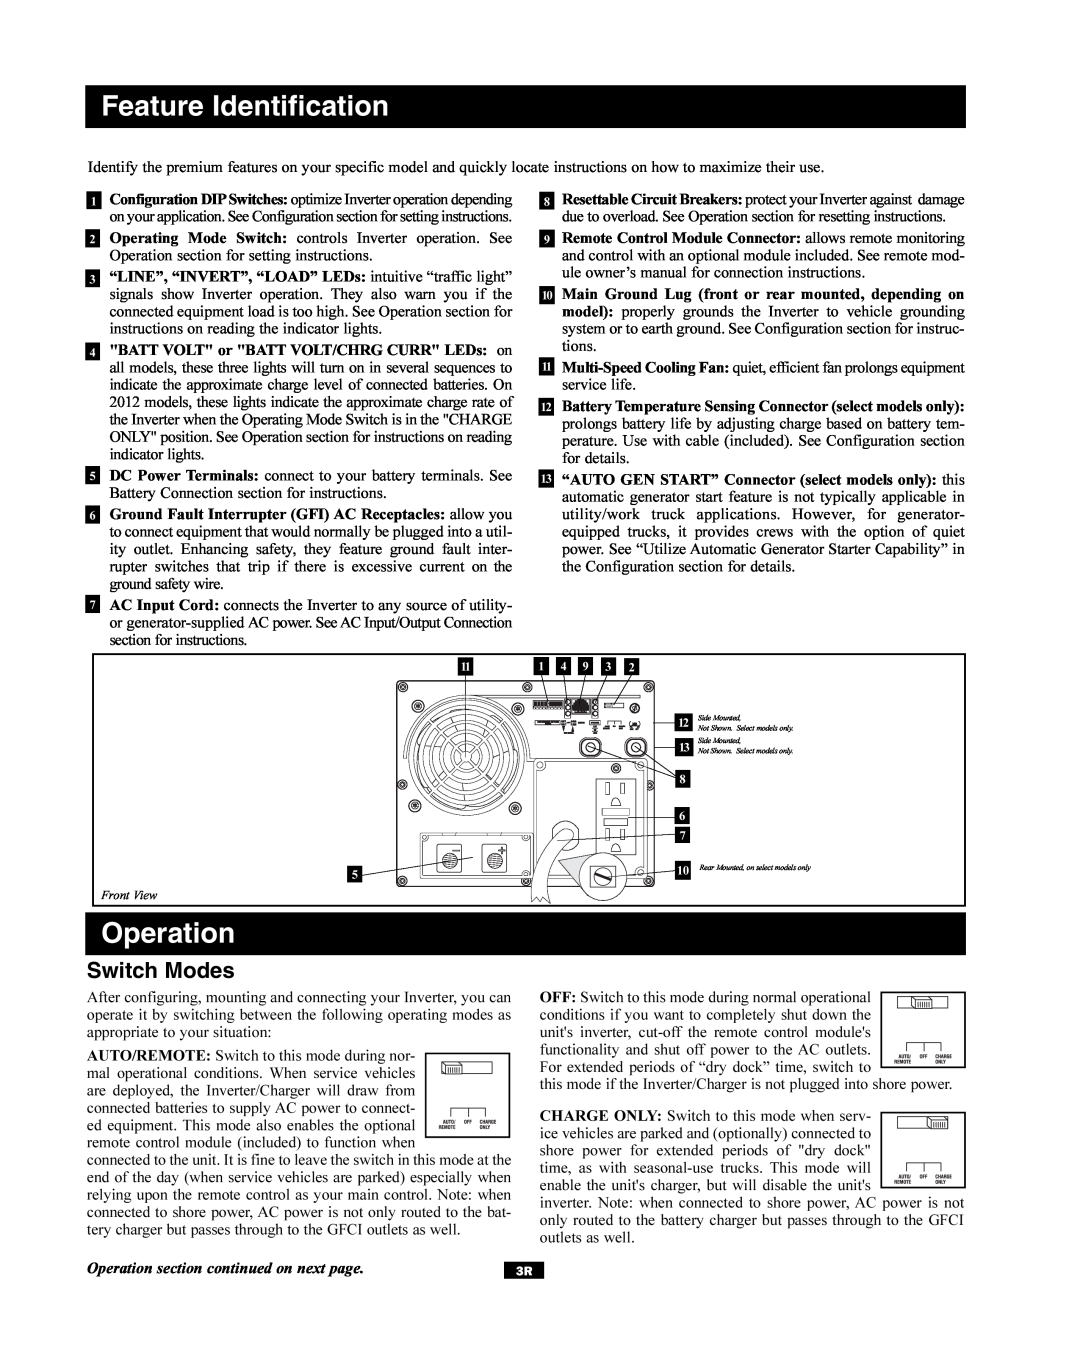 Tripp Lite UT Series owner manual Feature Identification, Switch Modes, Operation section continued on next page 